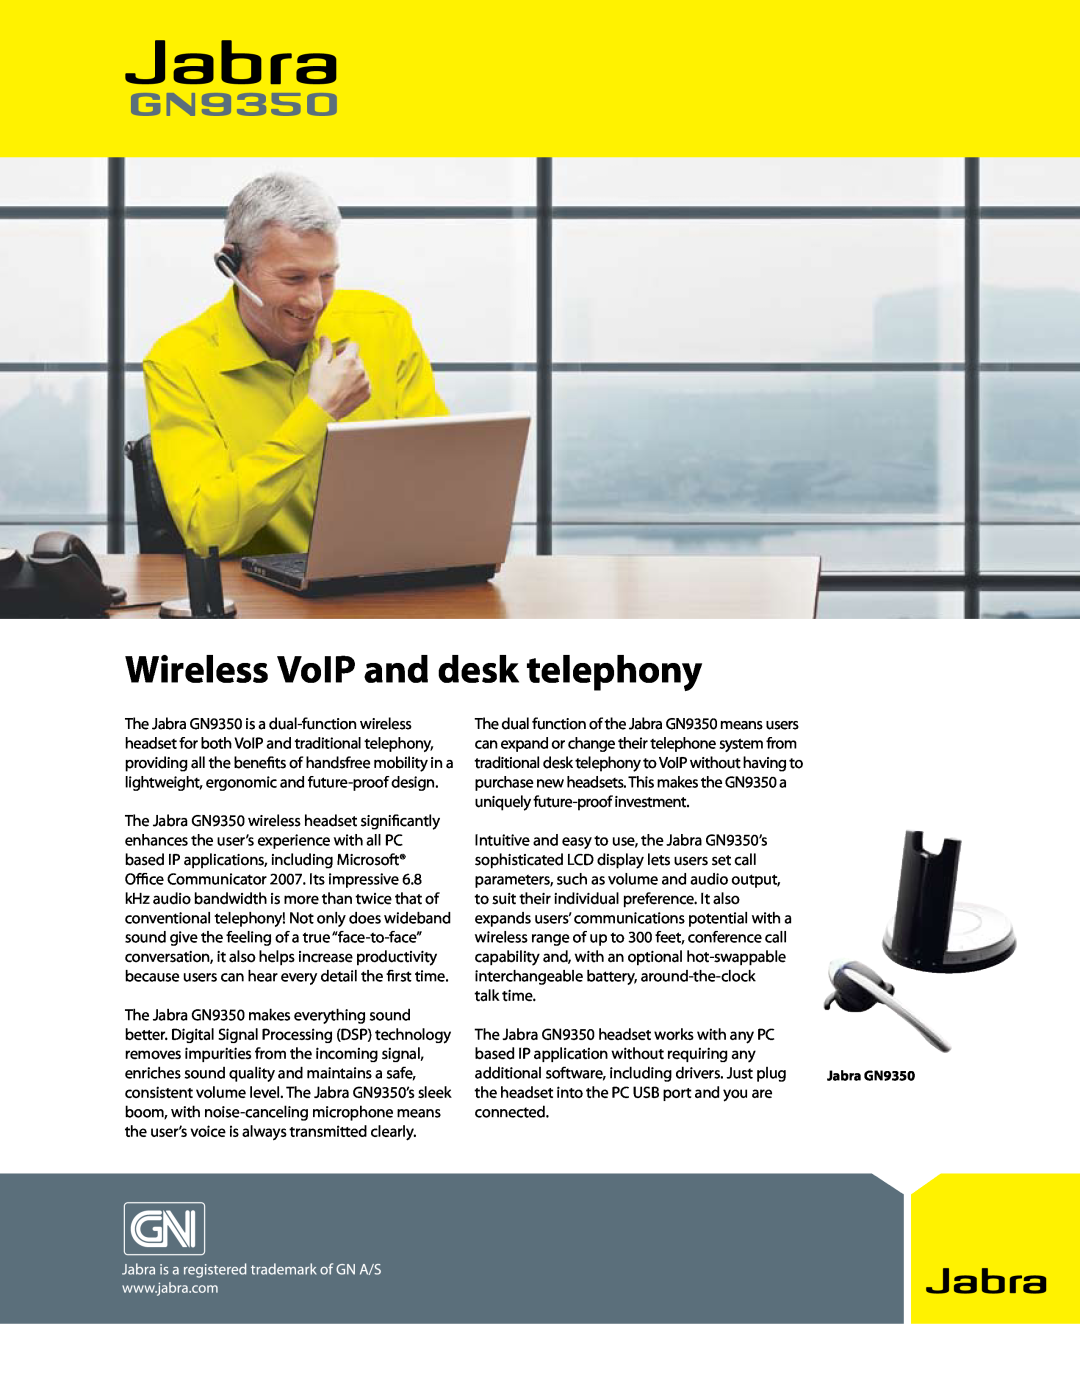 Jabra GN9350 manual jabra, Wireless VoIP and desk telephony, connected 